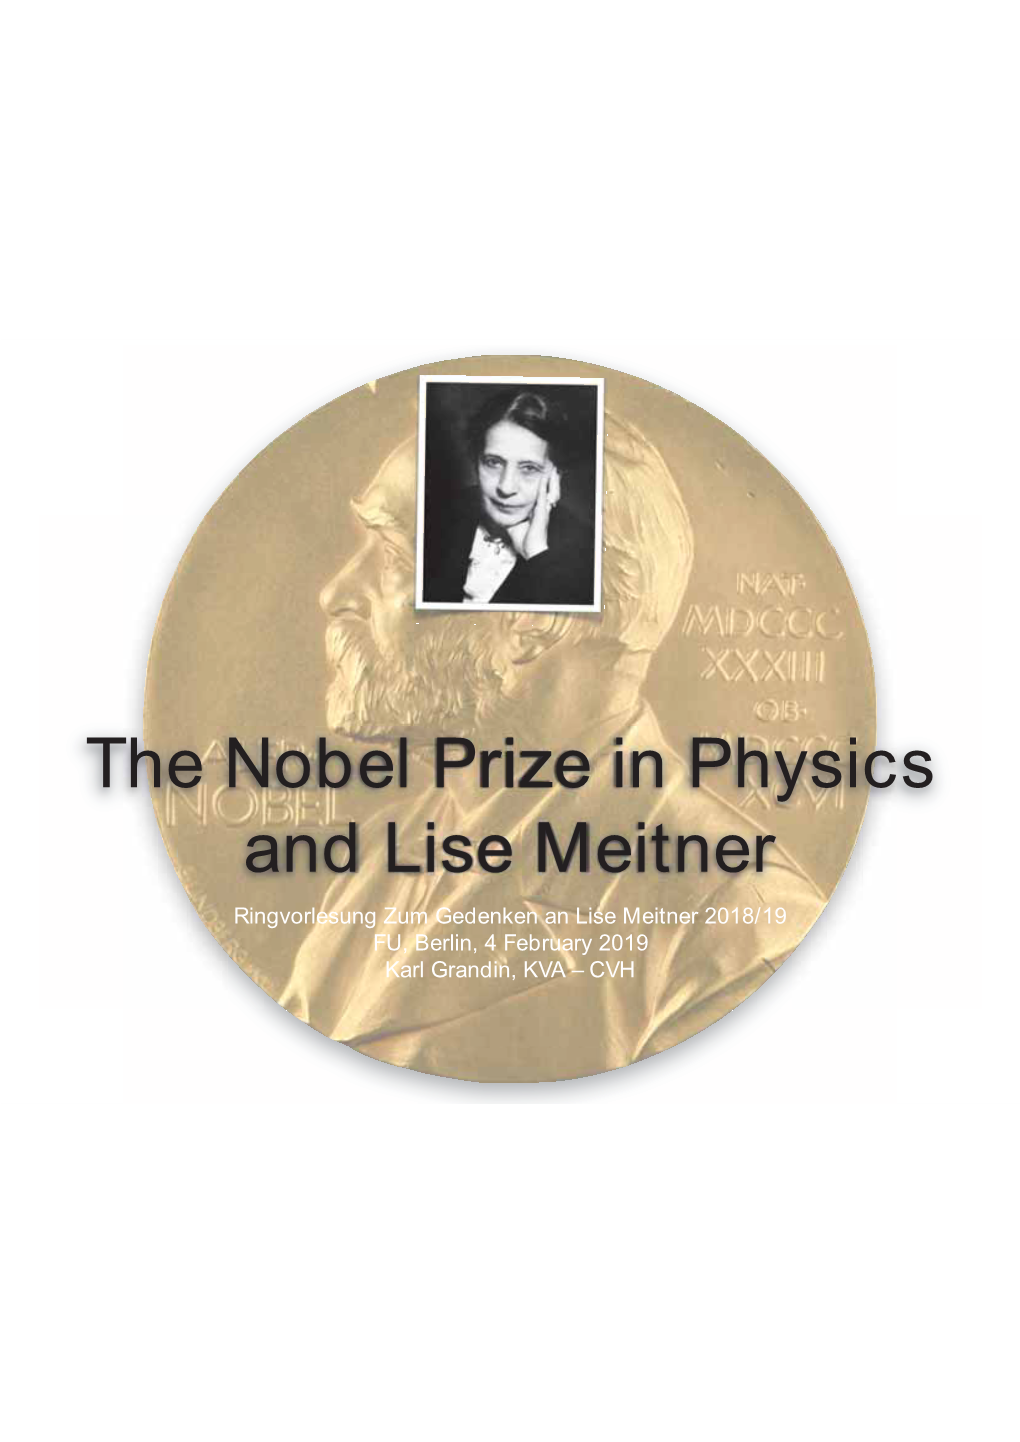 The Nobel Prize in Physics and Lise Meitner